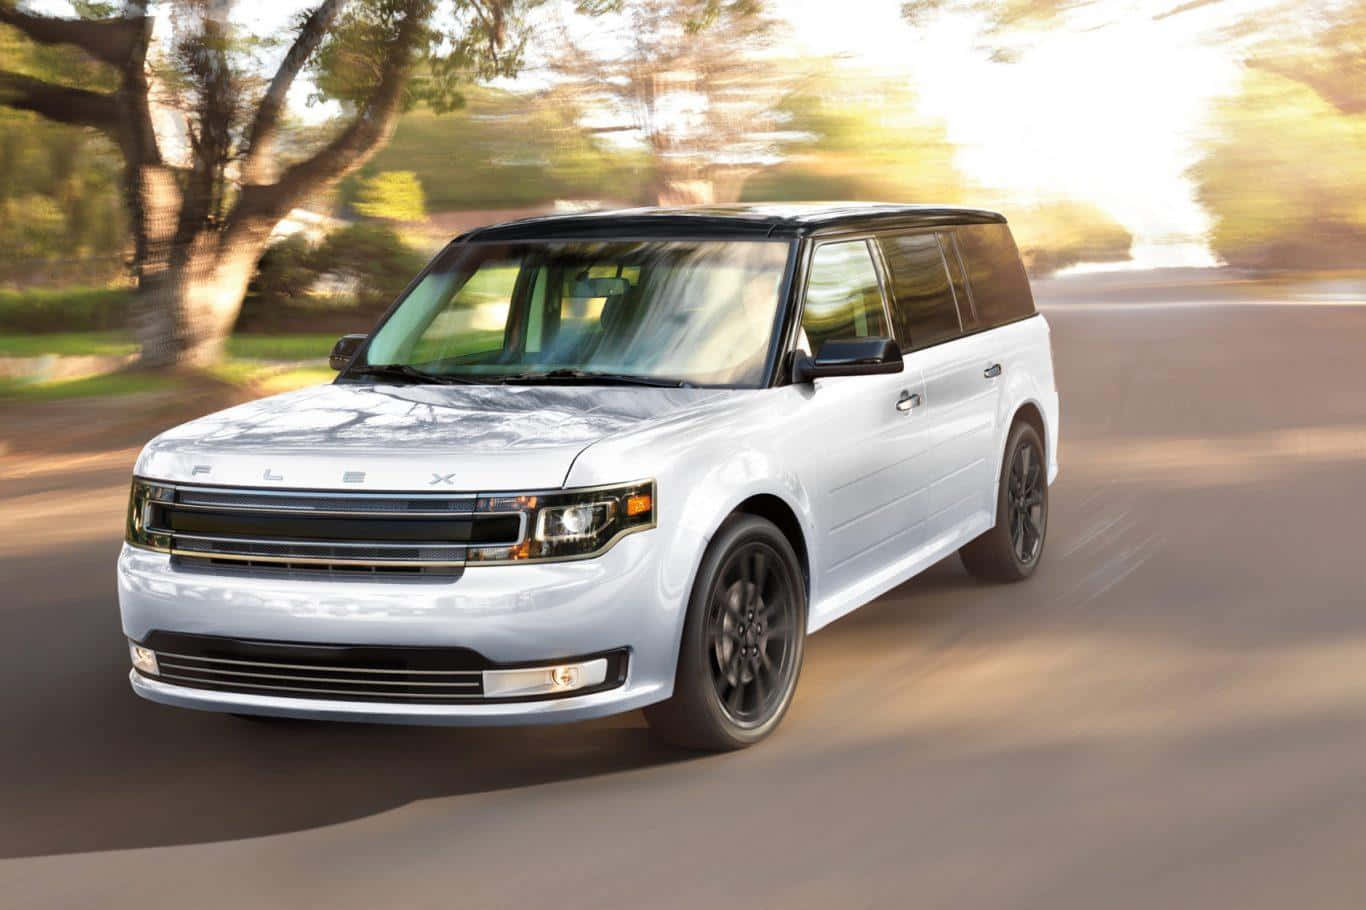 Ford Flex on the road Wallpaper